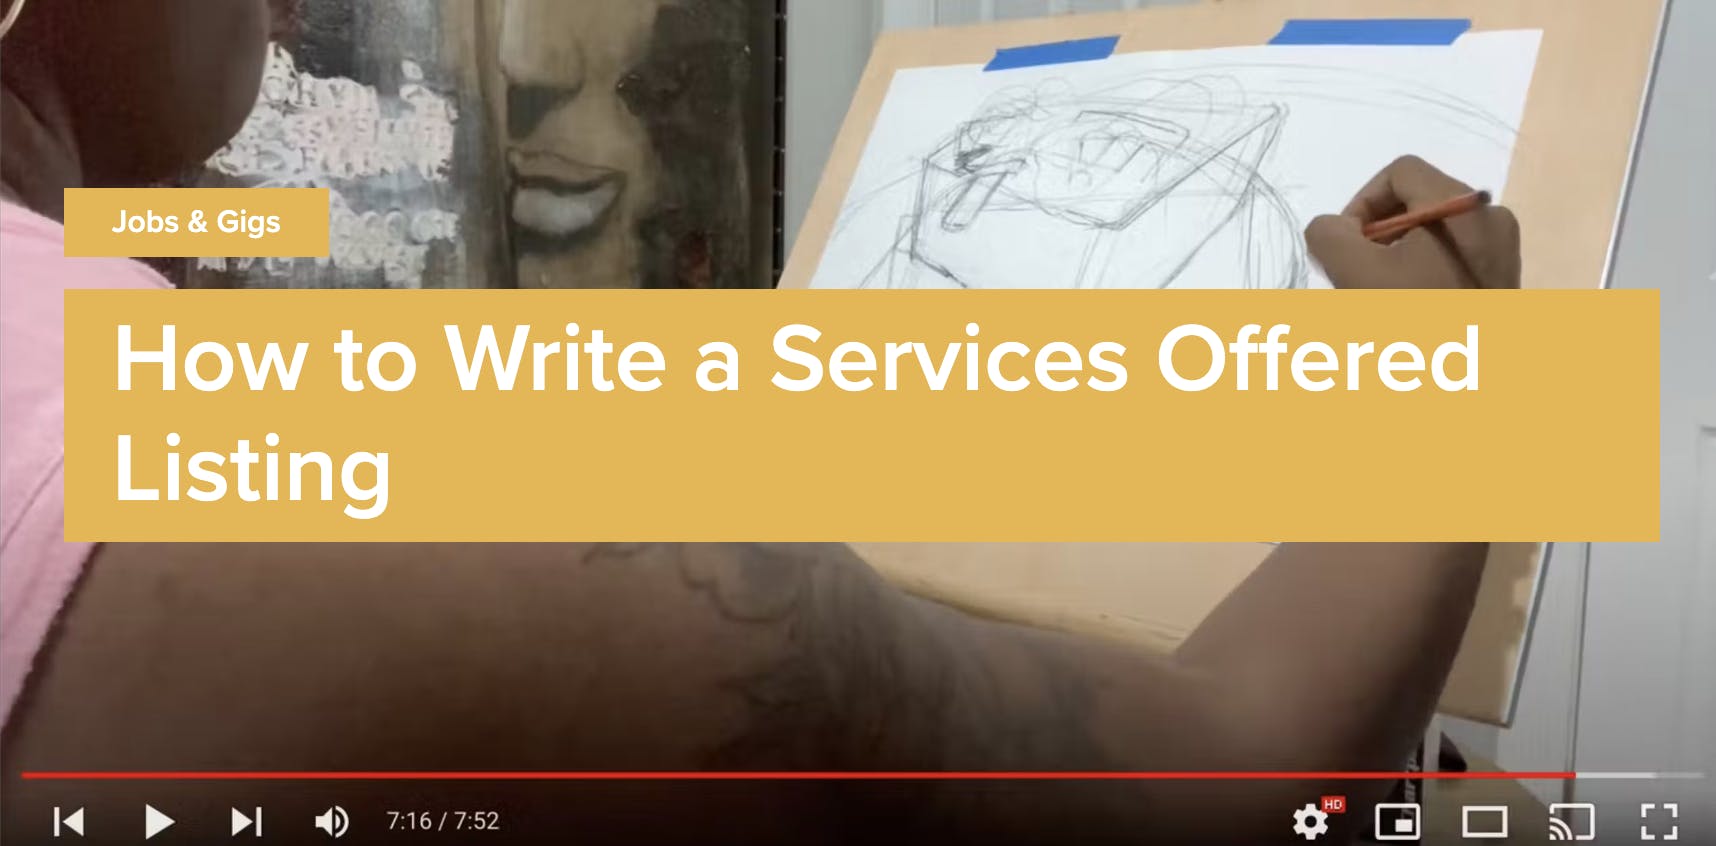 How to Write a Services Offered Listing